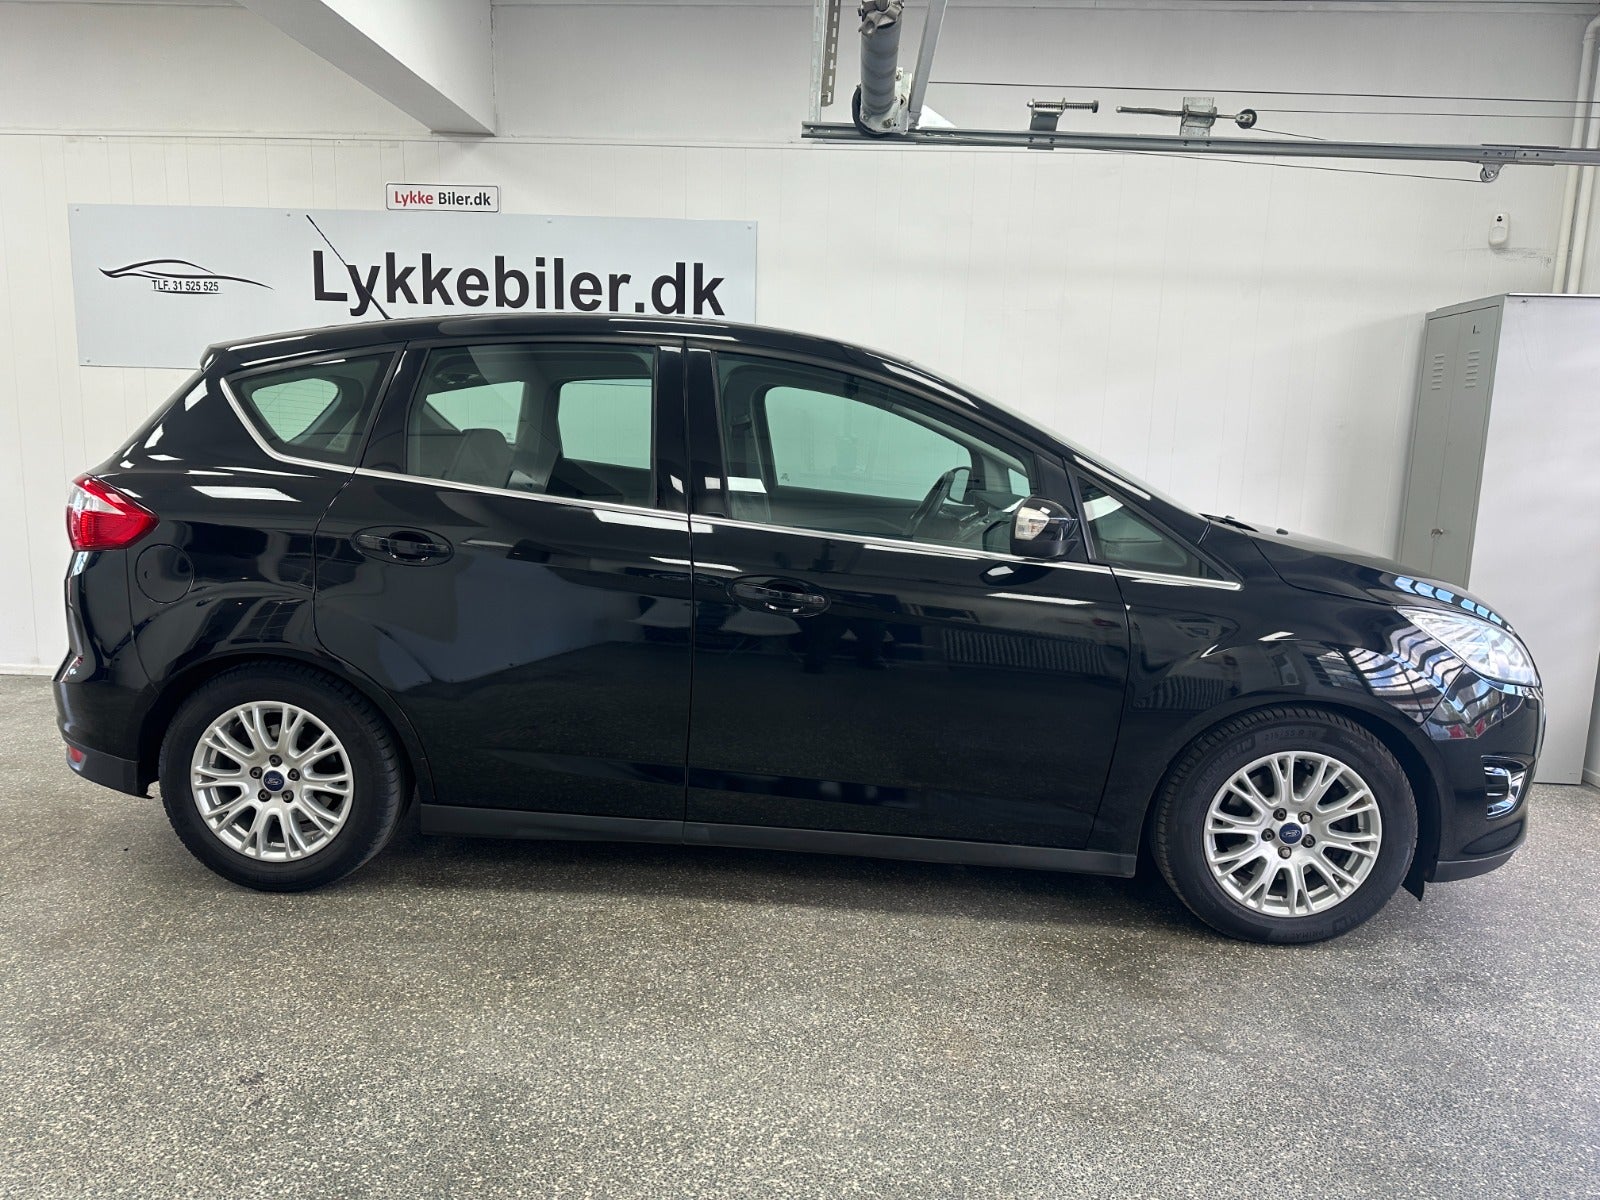 Ford C-MAX 2012